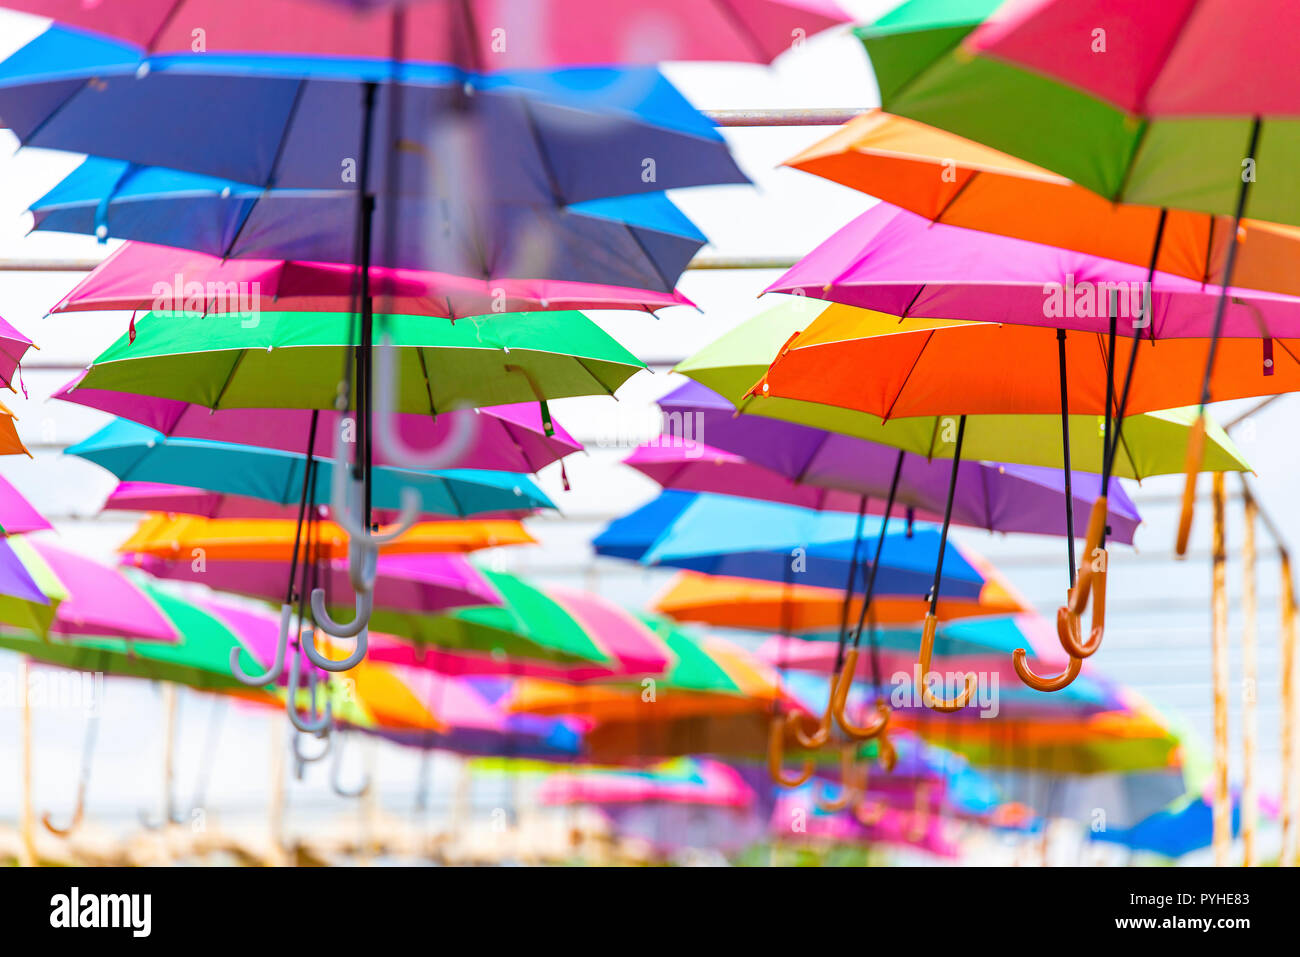 Colorful umbrellas decorate the place Stock Photo